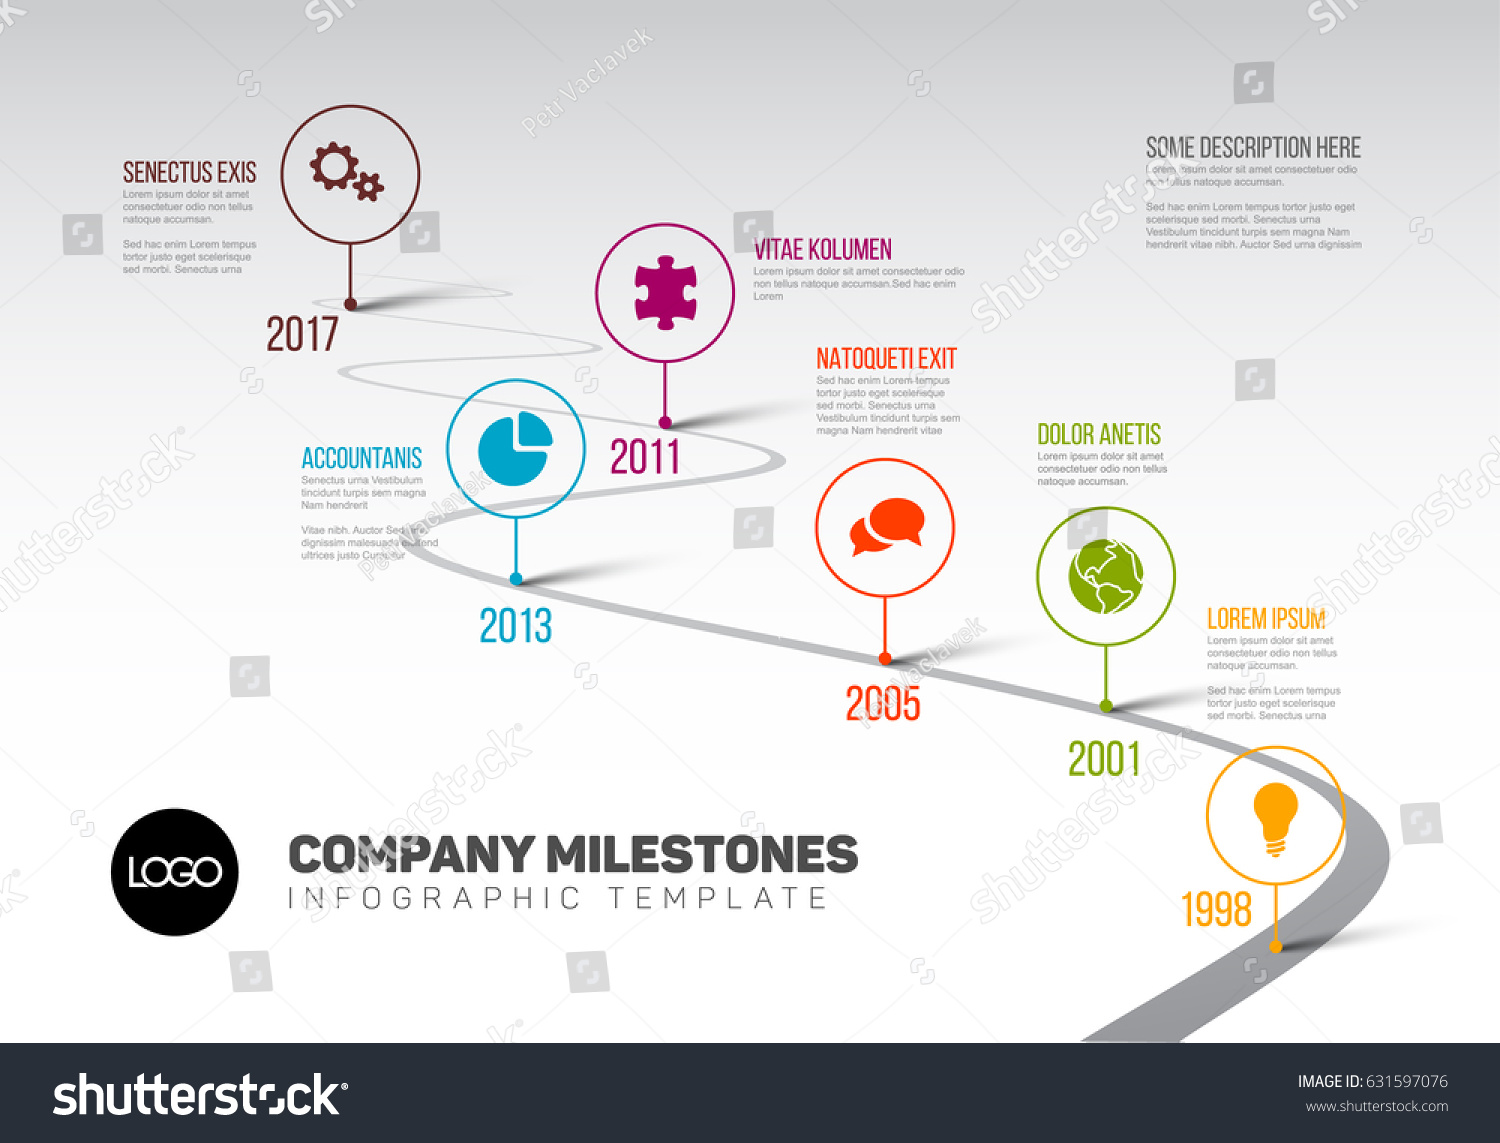 SVG of Vector Infographic Company Milestones Timeline Template with pointers on a curved road line svg